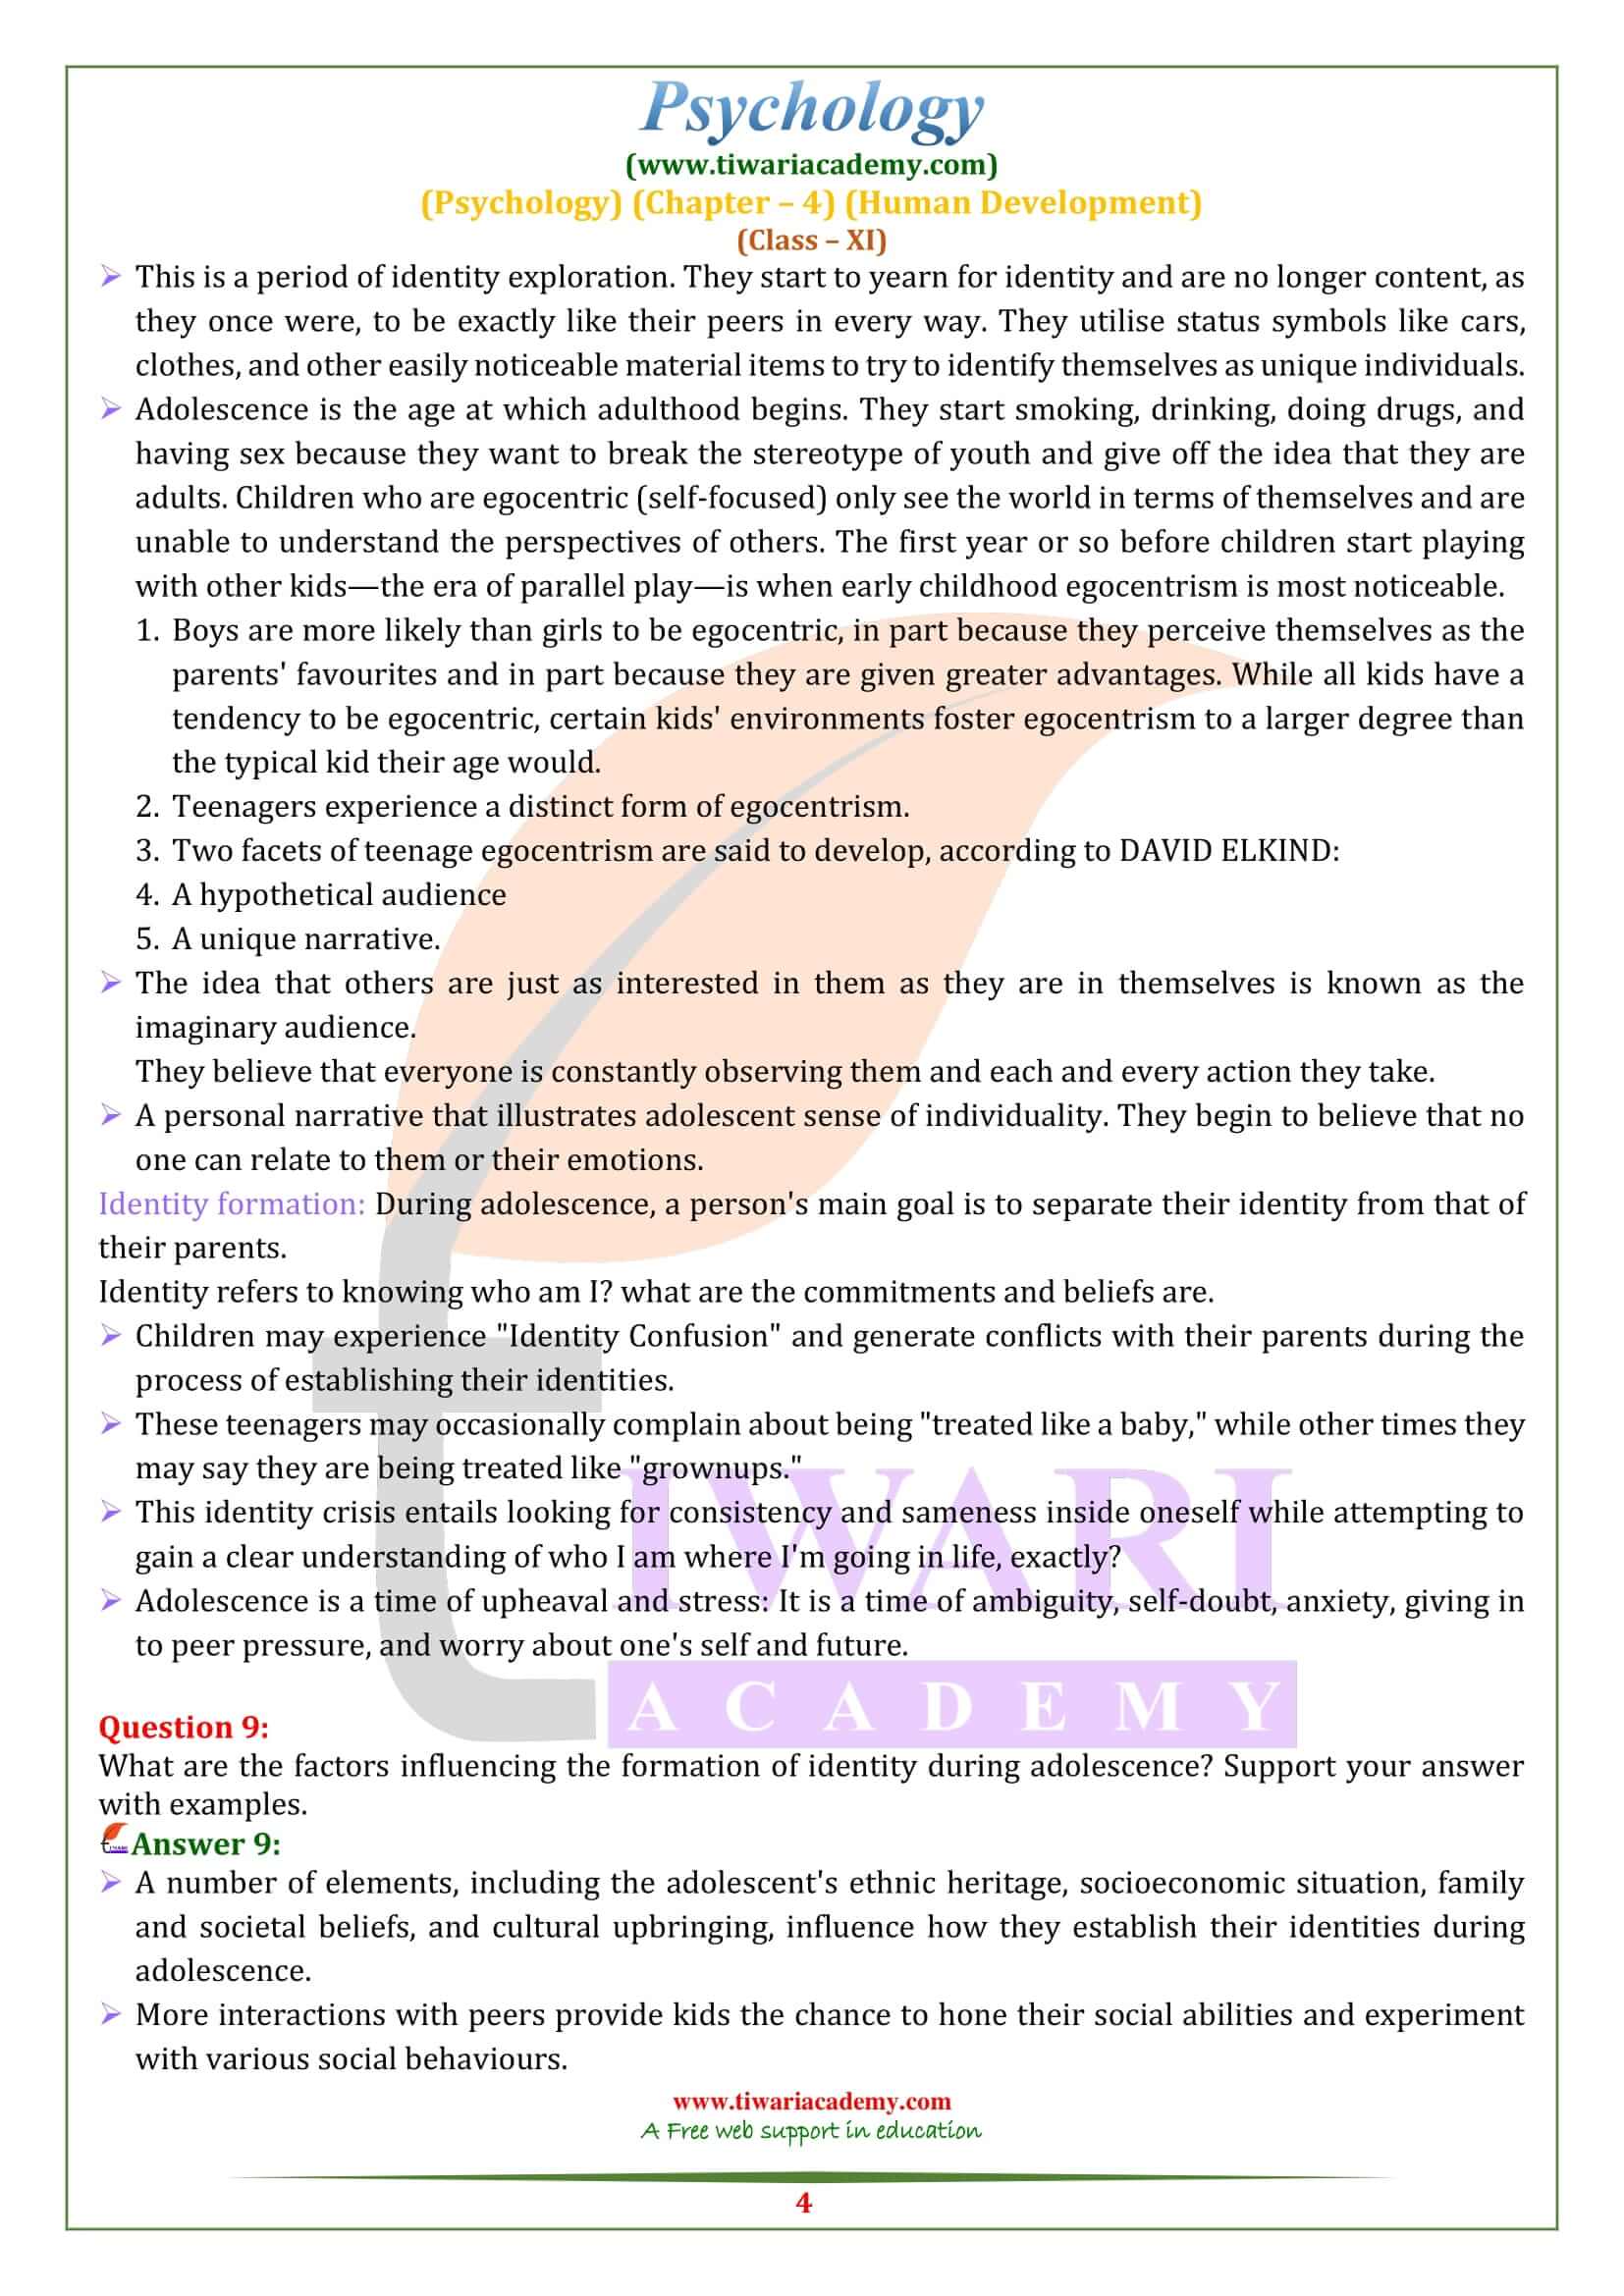 NCERT Solutions for Class 11 Psychology Chapter 4 in English Medium